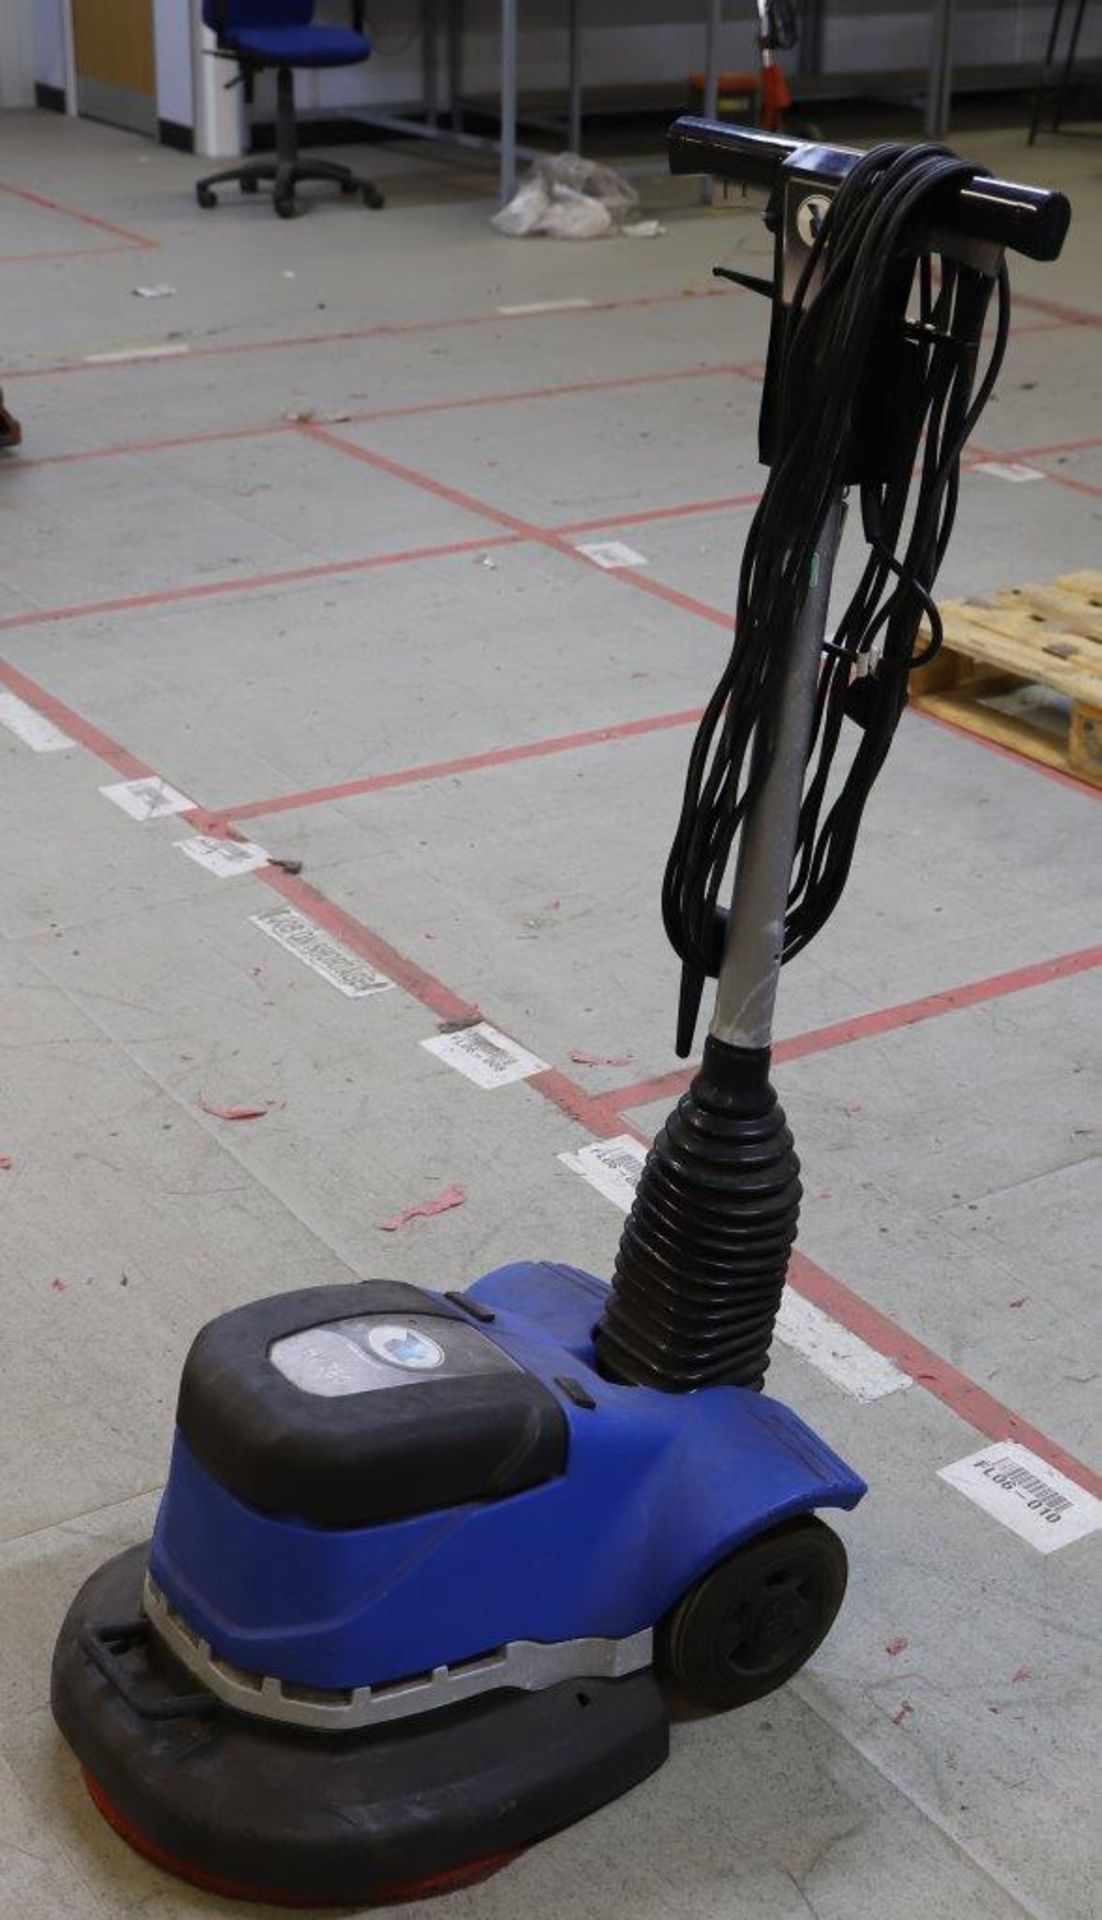 Two Premiere HV380 Rotary Floor Cleaning Machines for Hard Floors & Carpet Care